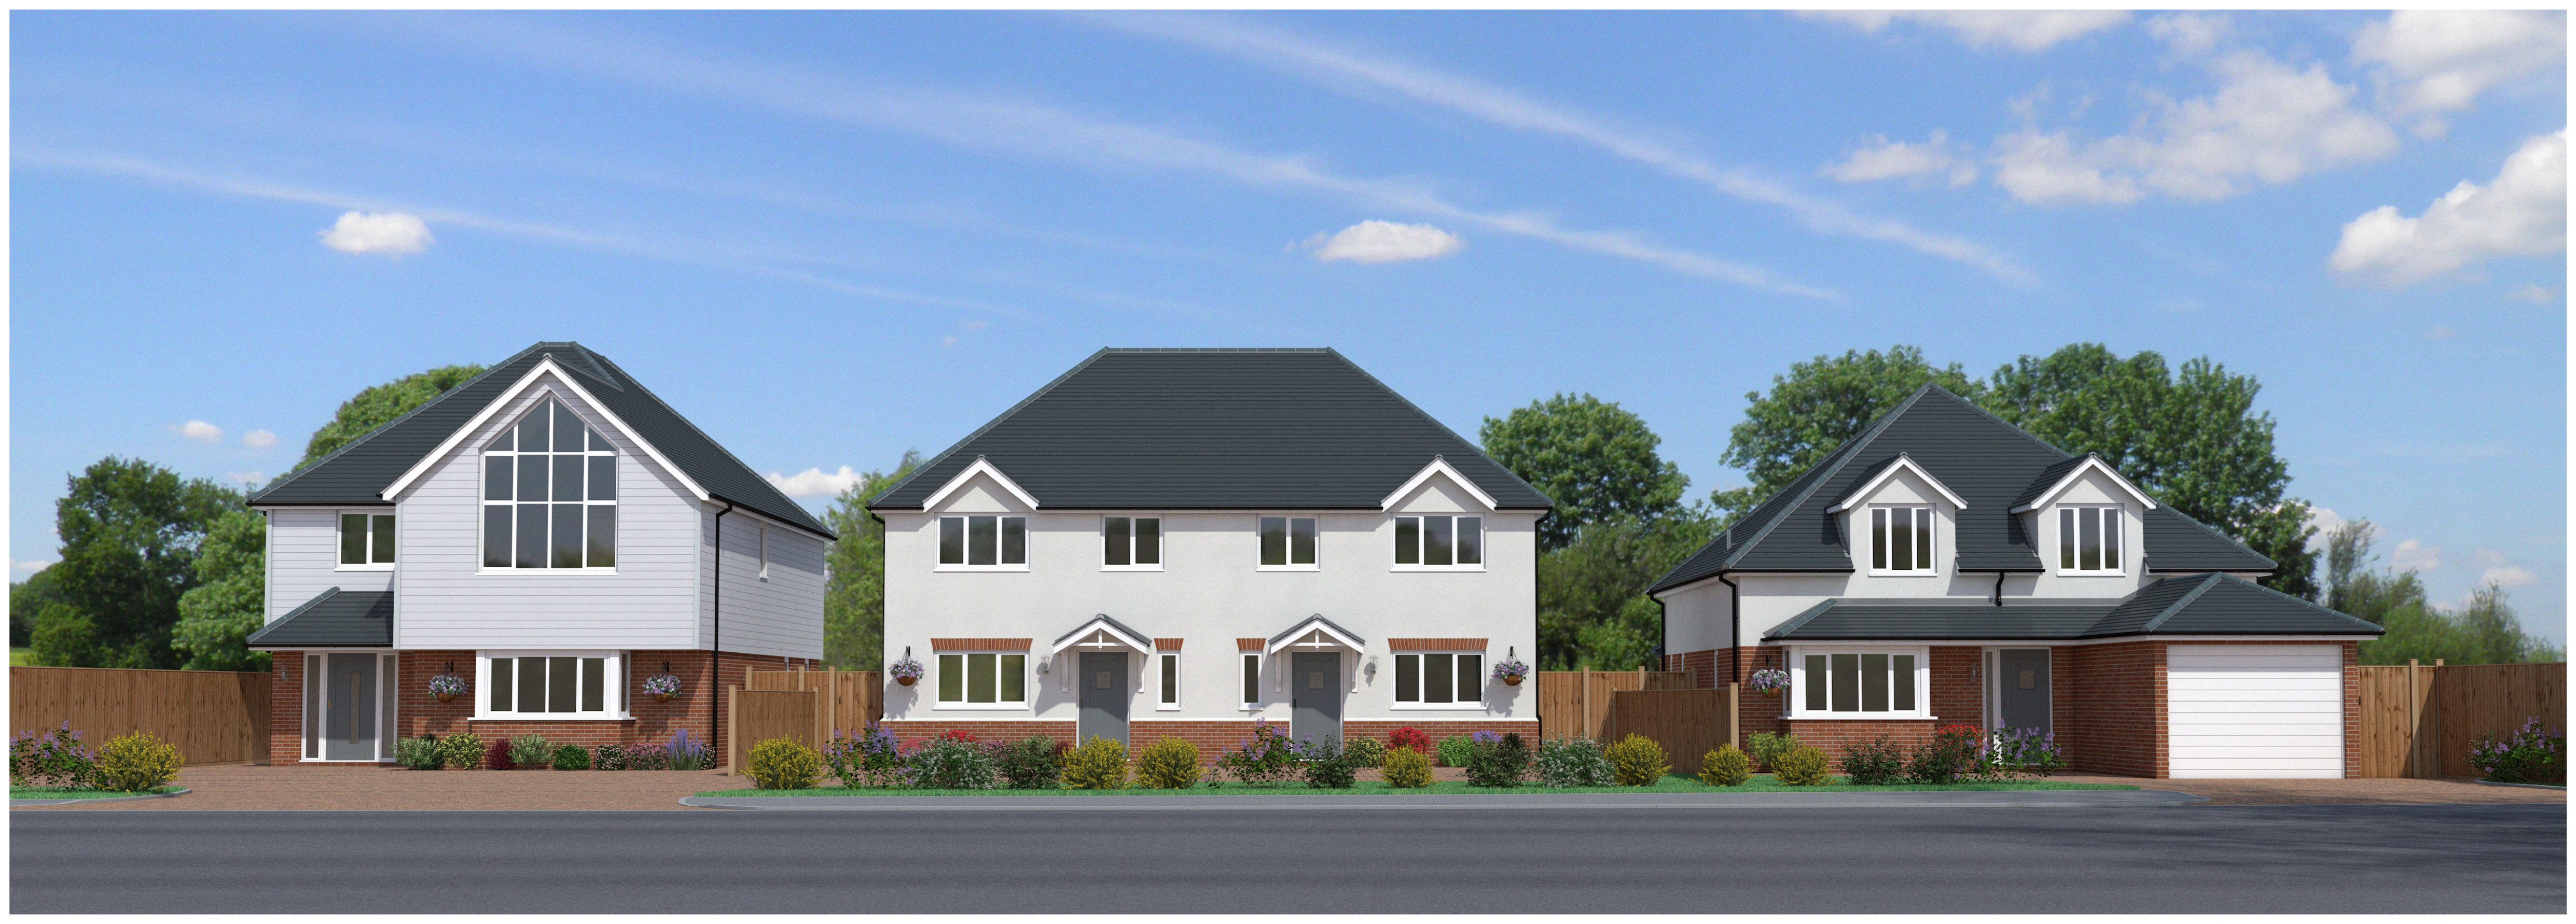 **Currently Under Development** 4 Bedroom Homes in High Road, North Weald